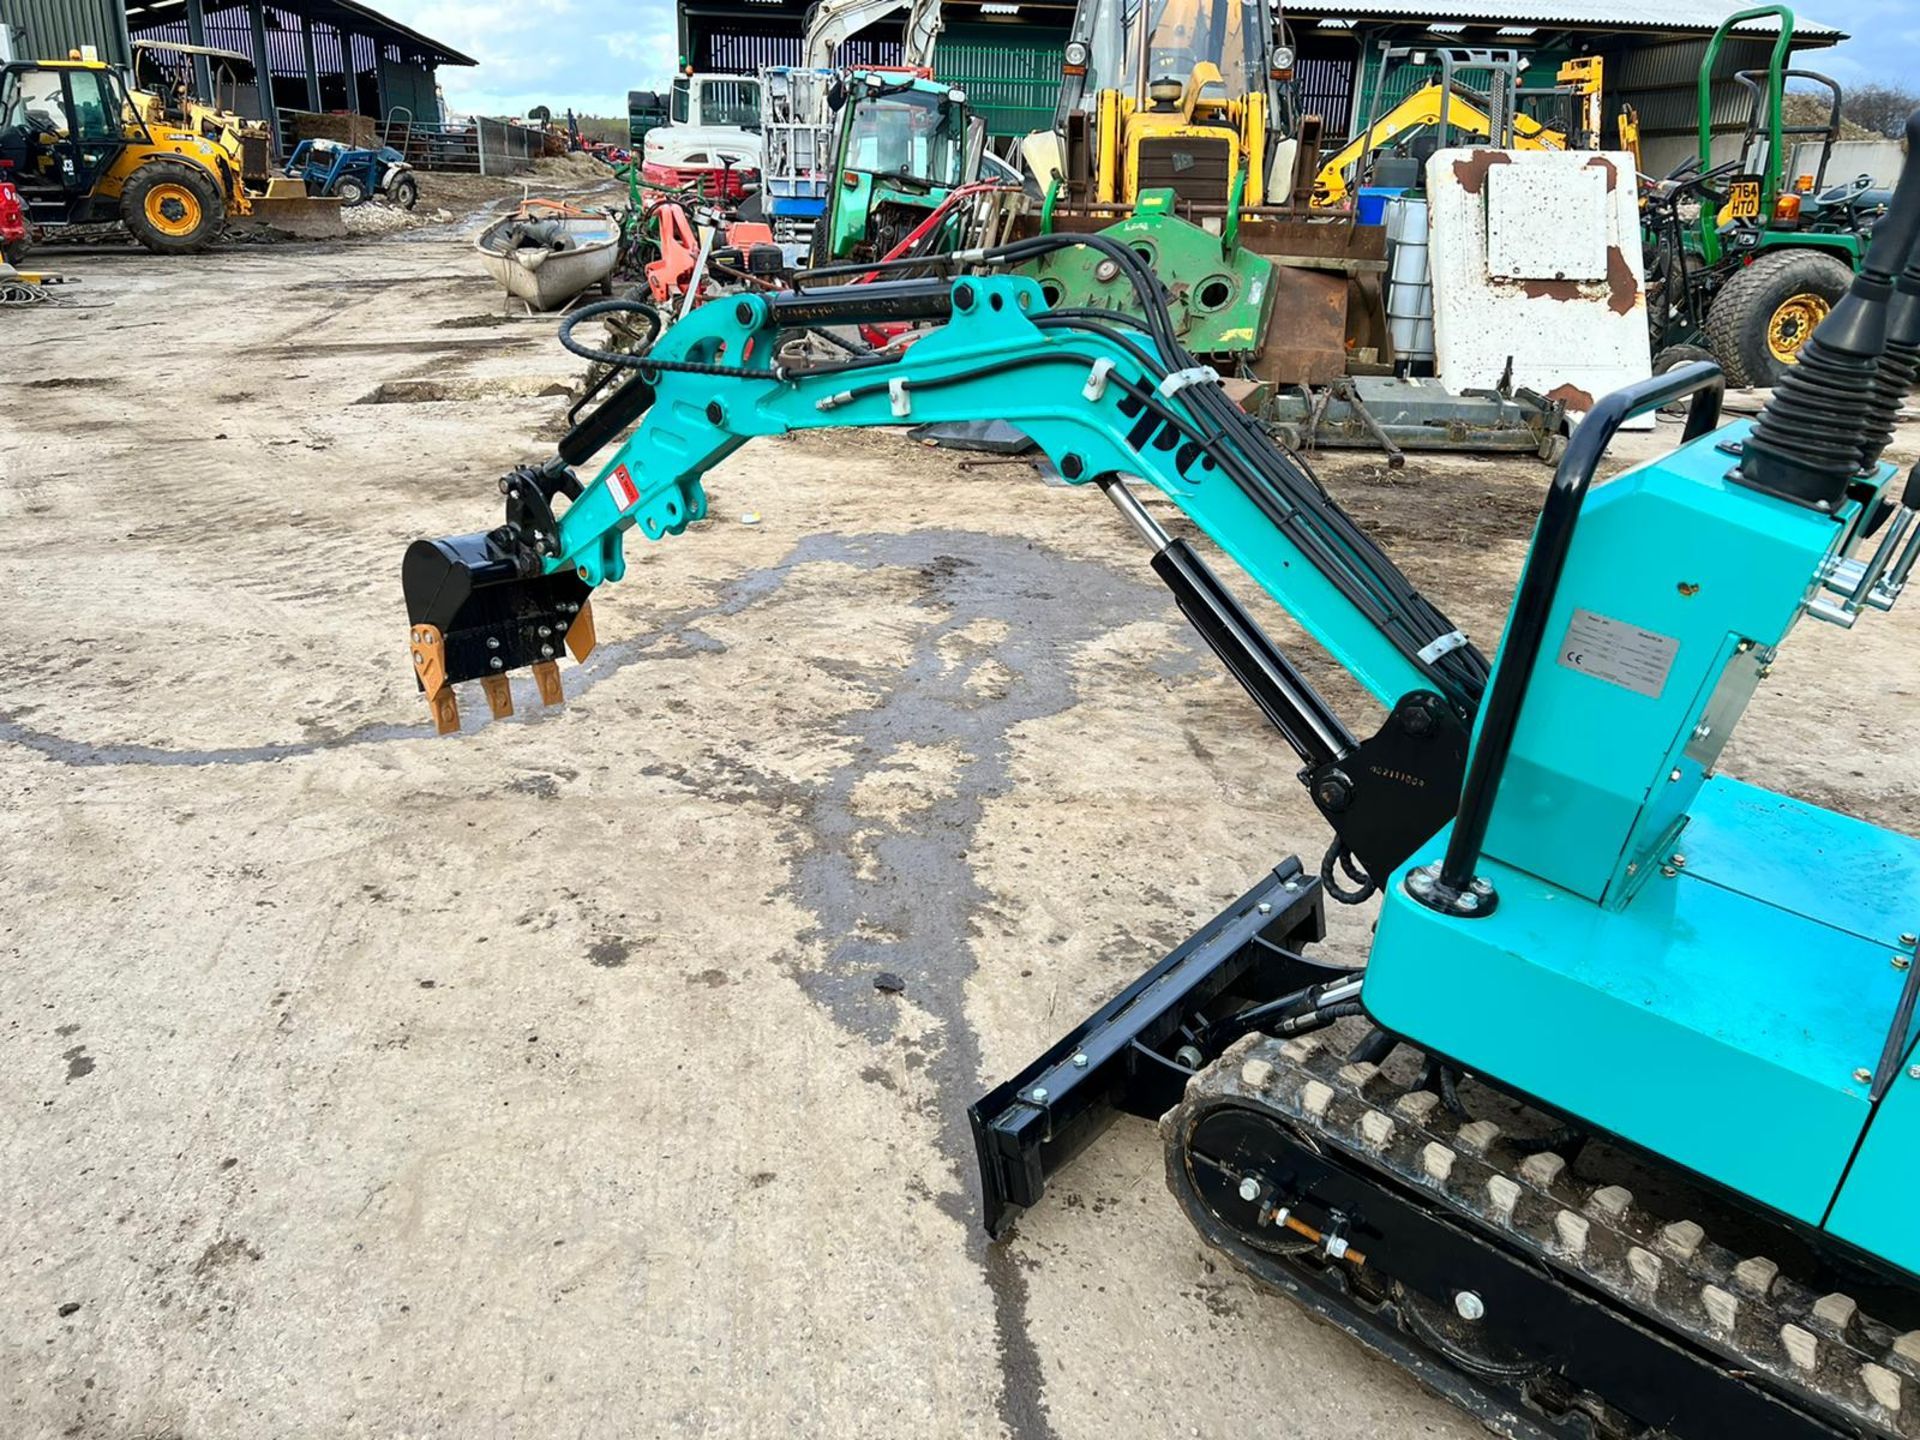 New And Unused JPC PC10 1 Ton Mini Digger, Runs Drives And Digs, Rubber Tracks *PLUS VAT* - Image 9 of 10